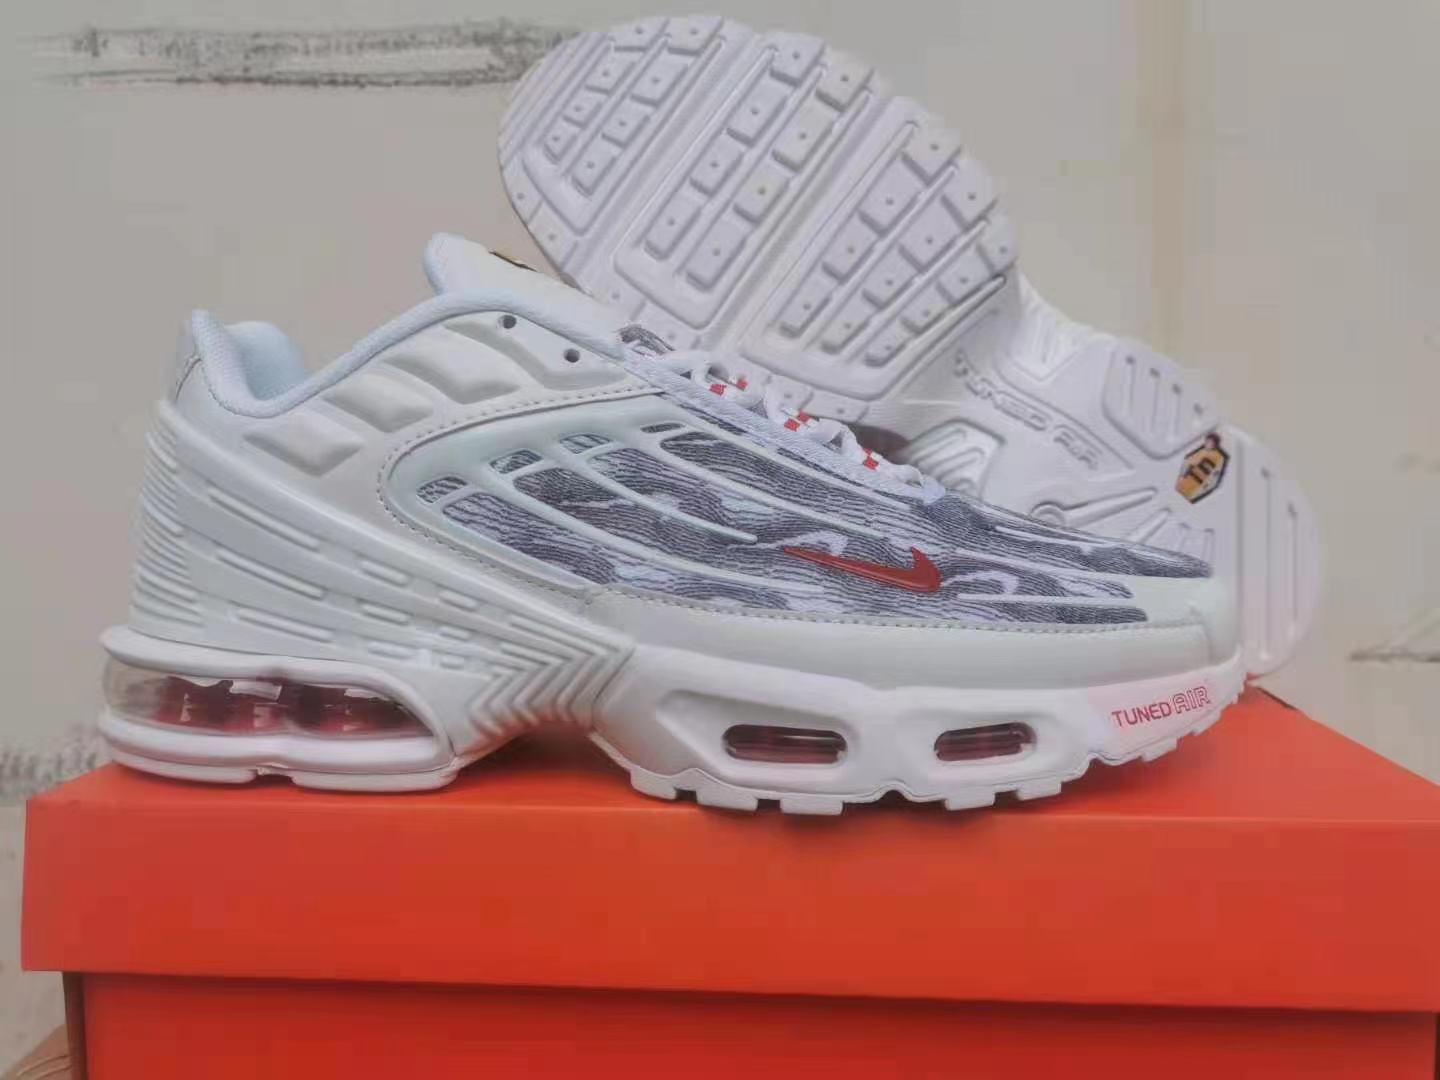 Women's Hot sale Running weapon Air Max TN Shoes 025